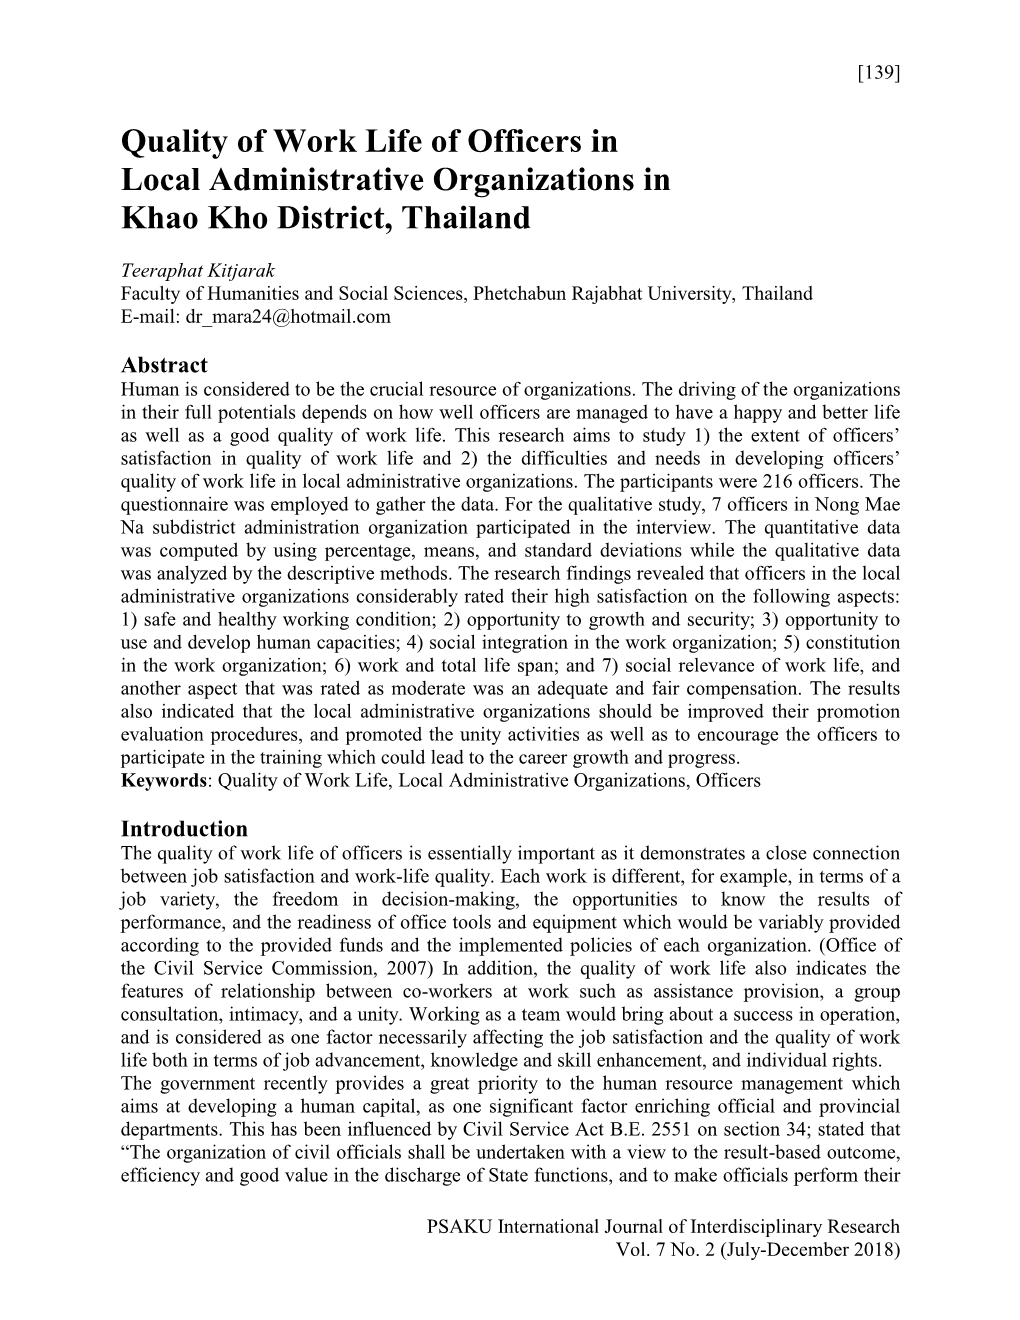 Quality of Work Life of Officers in Local Administrative Organizations in Khao Kho District, Thailand